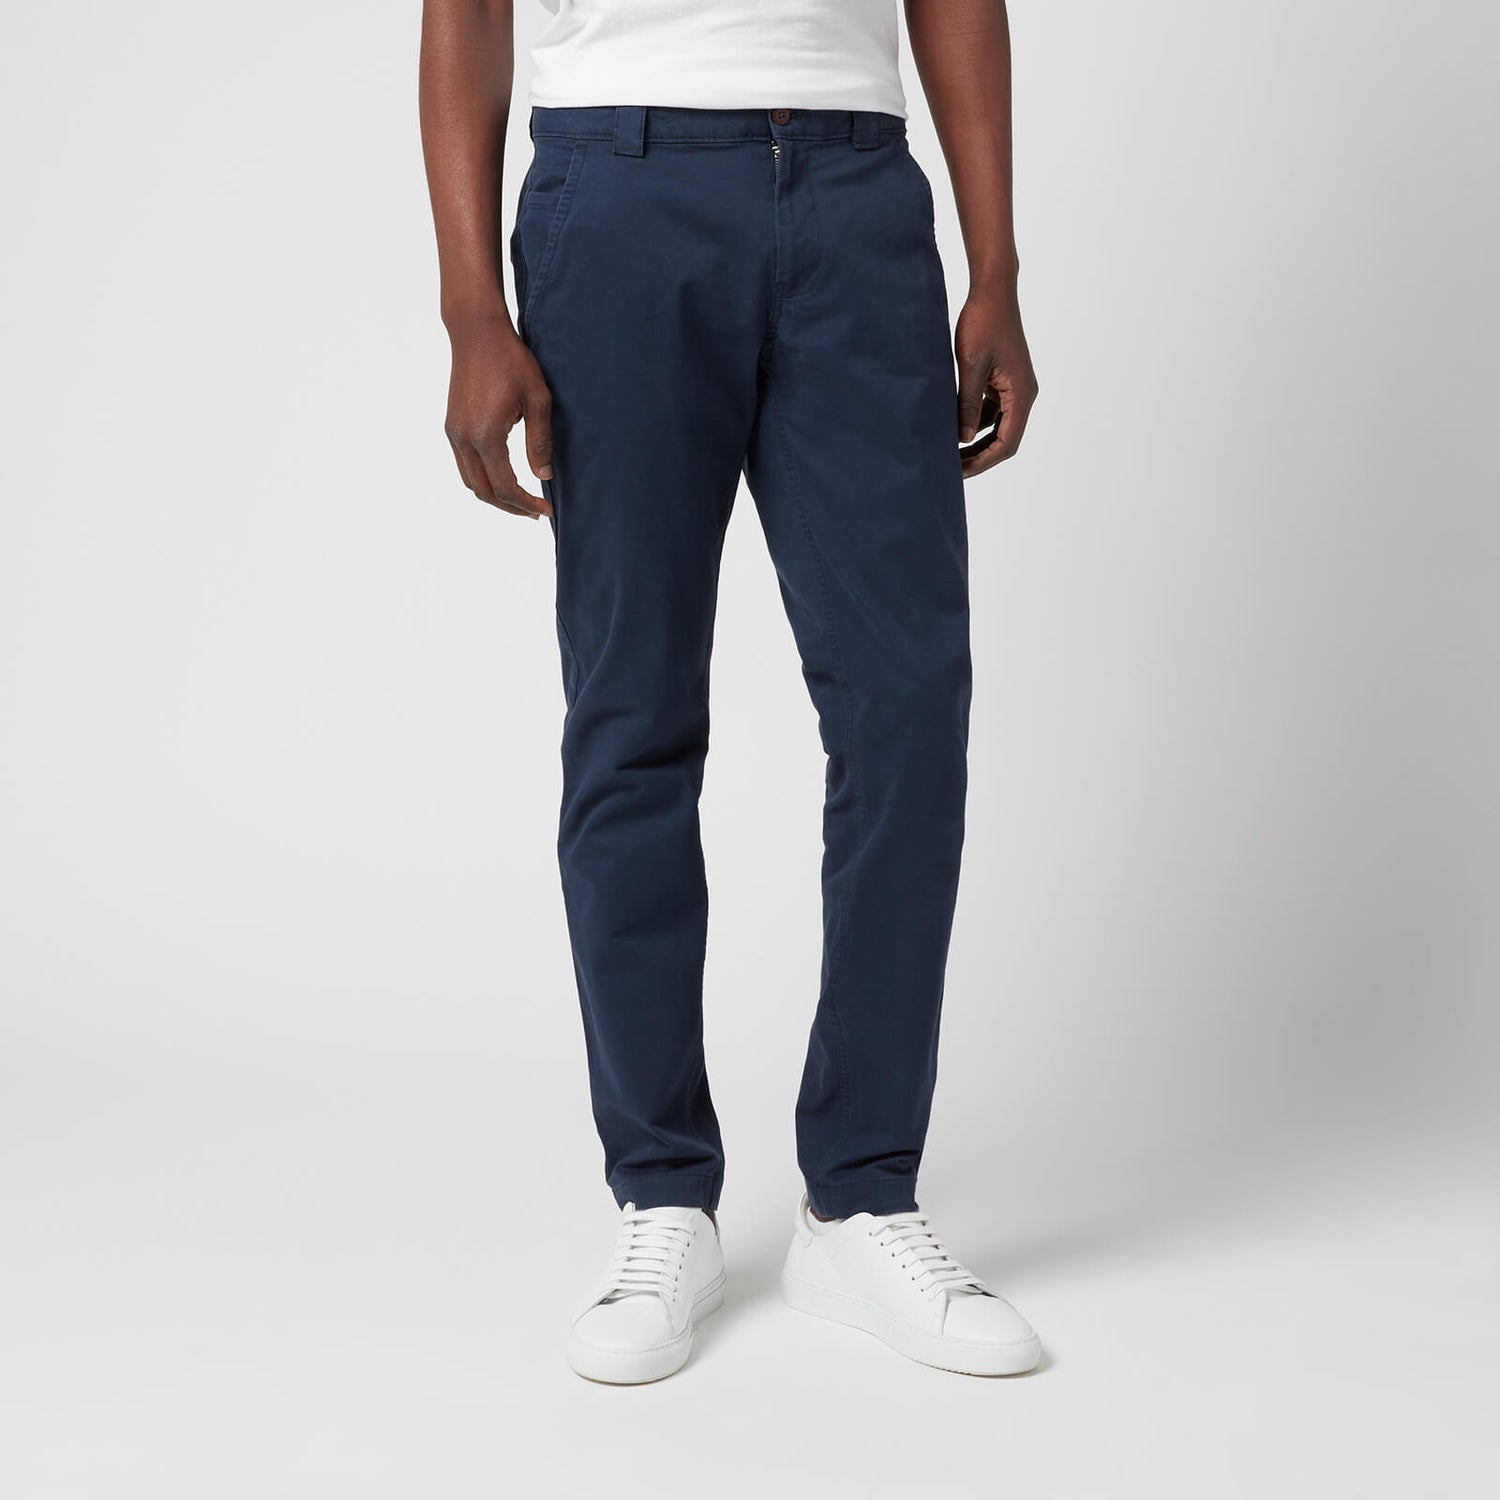 Tommy Jeans Men's Scanton Chino Pants - Twilight Navy - W30/L32